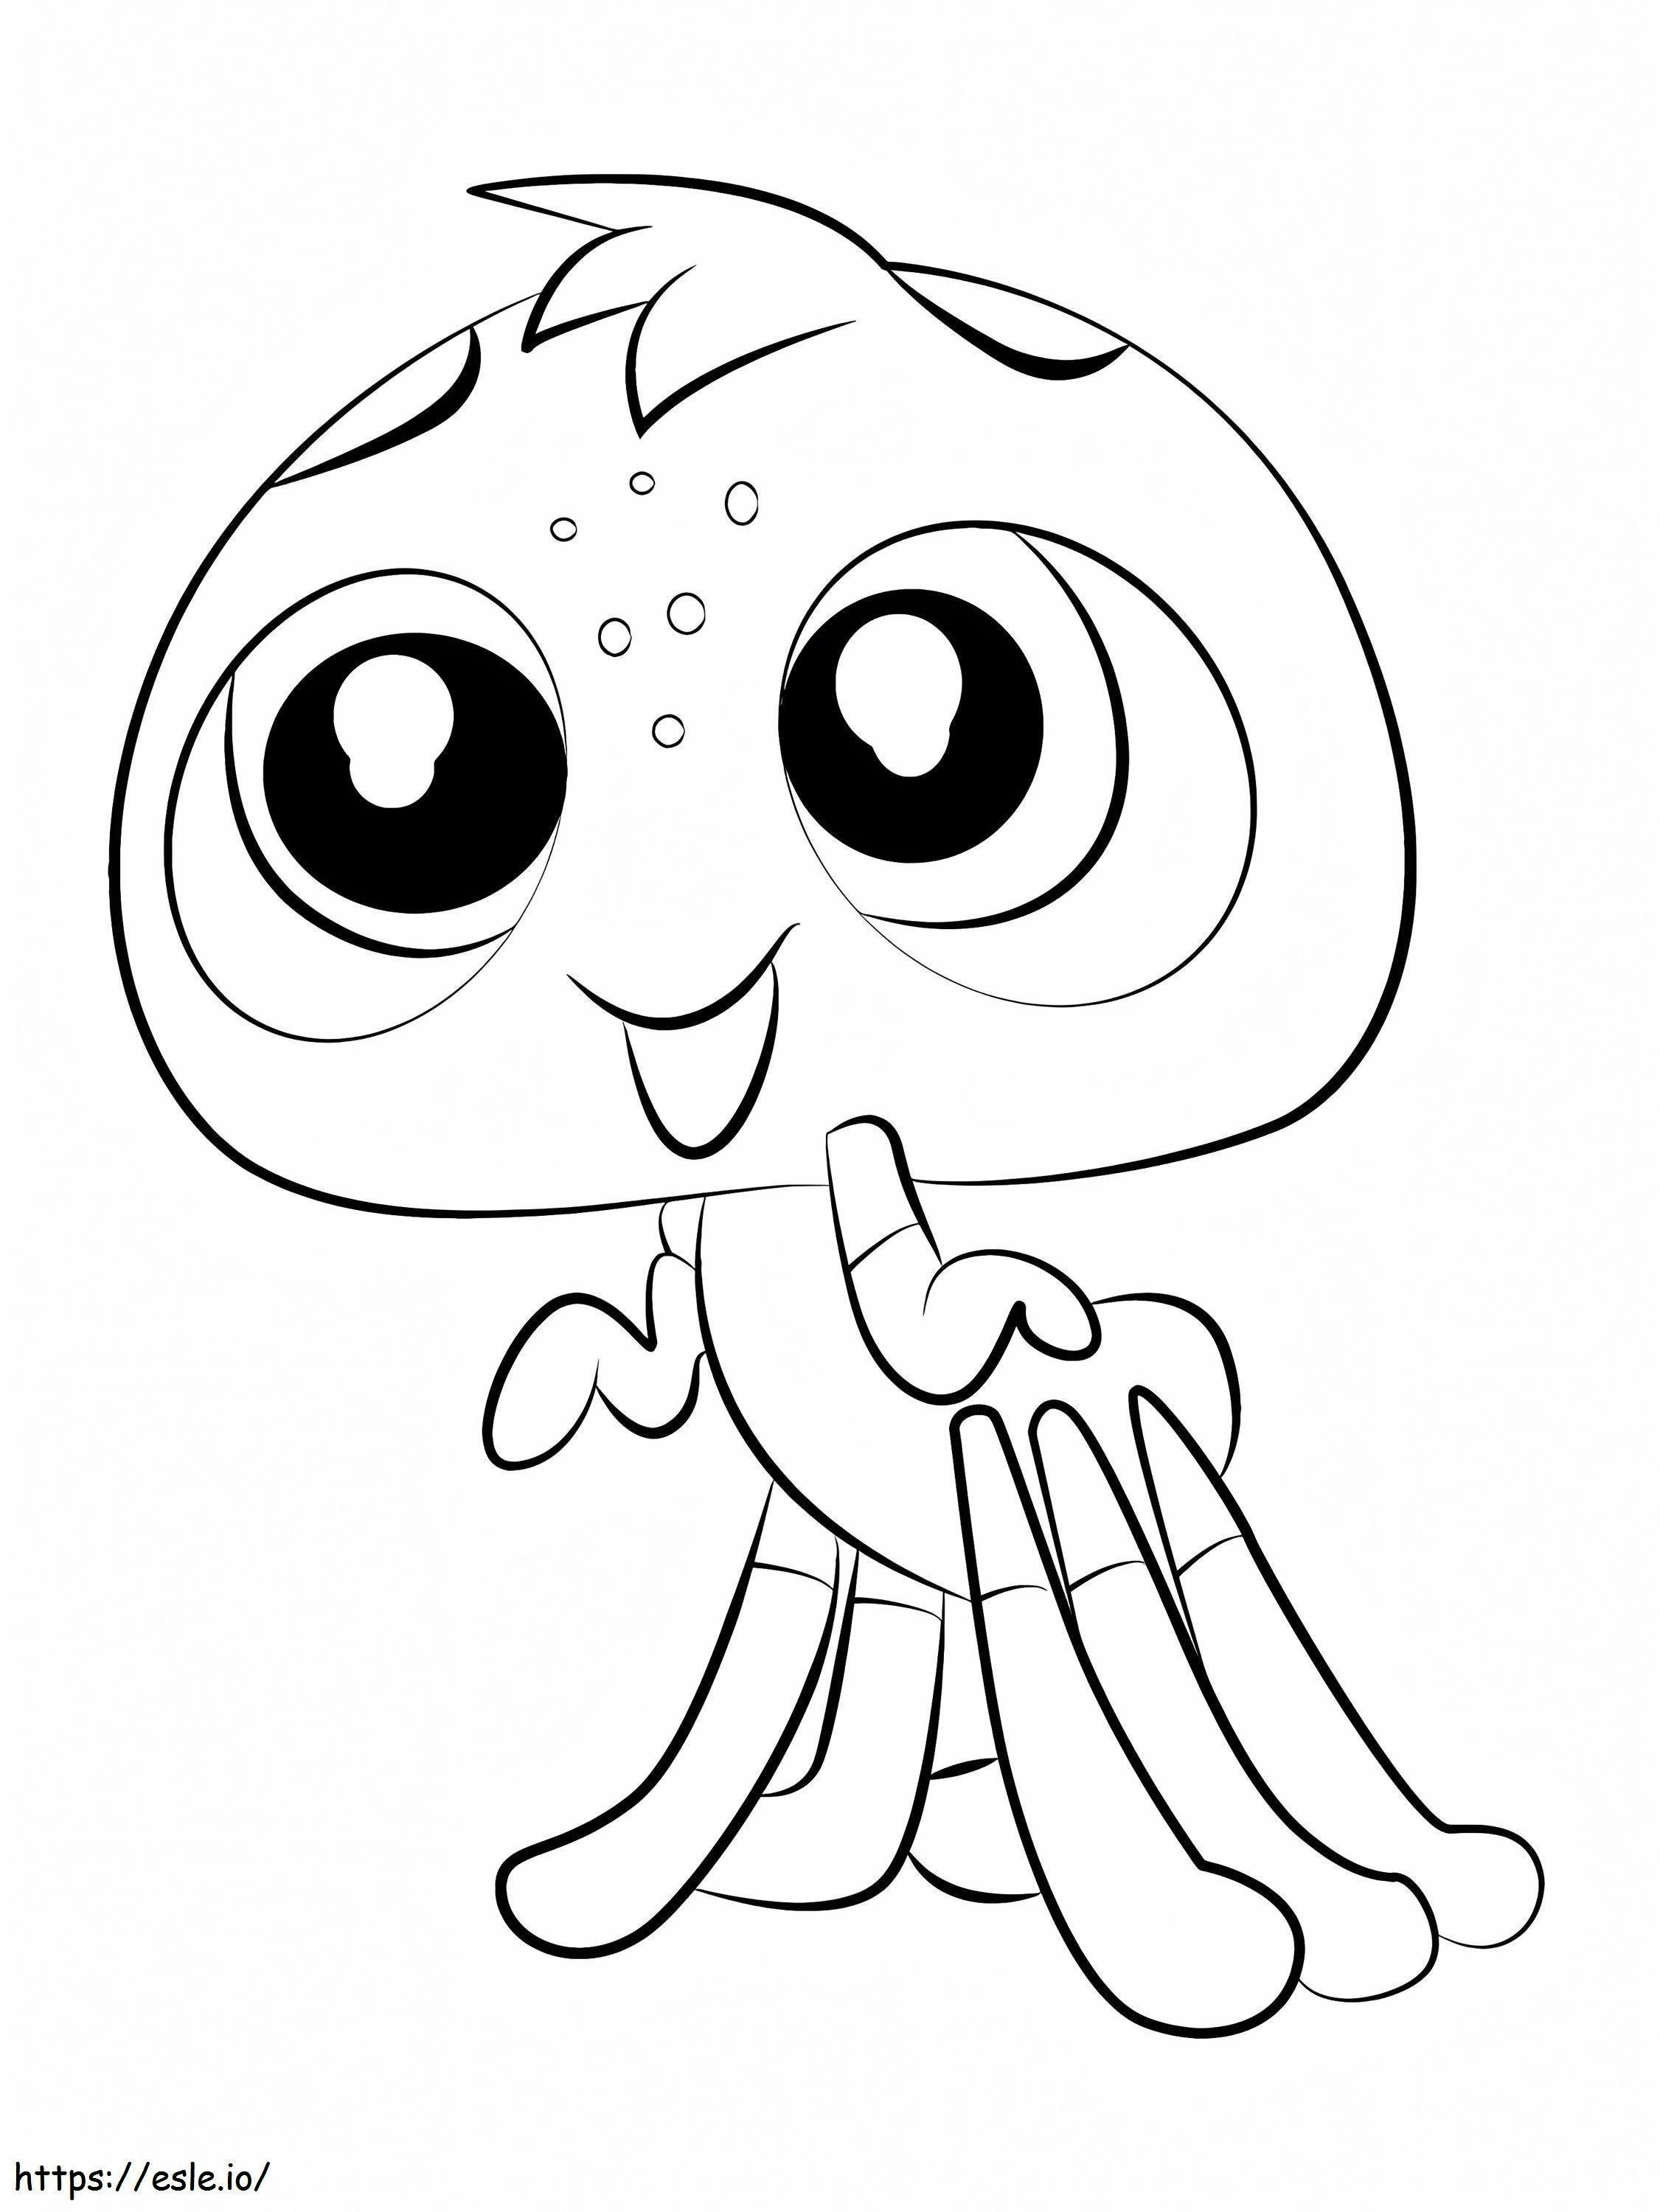 1589789109 How To Draw Weber From Littlest Pet Shop Step 0 coloring page